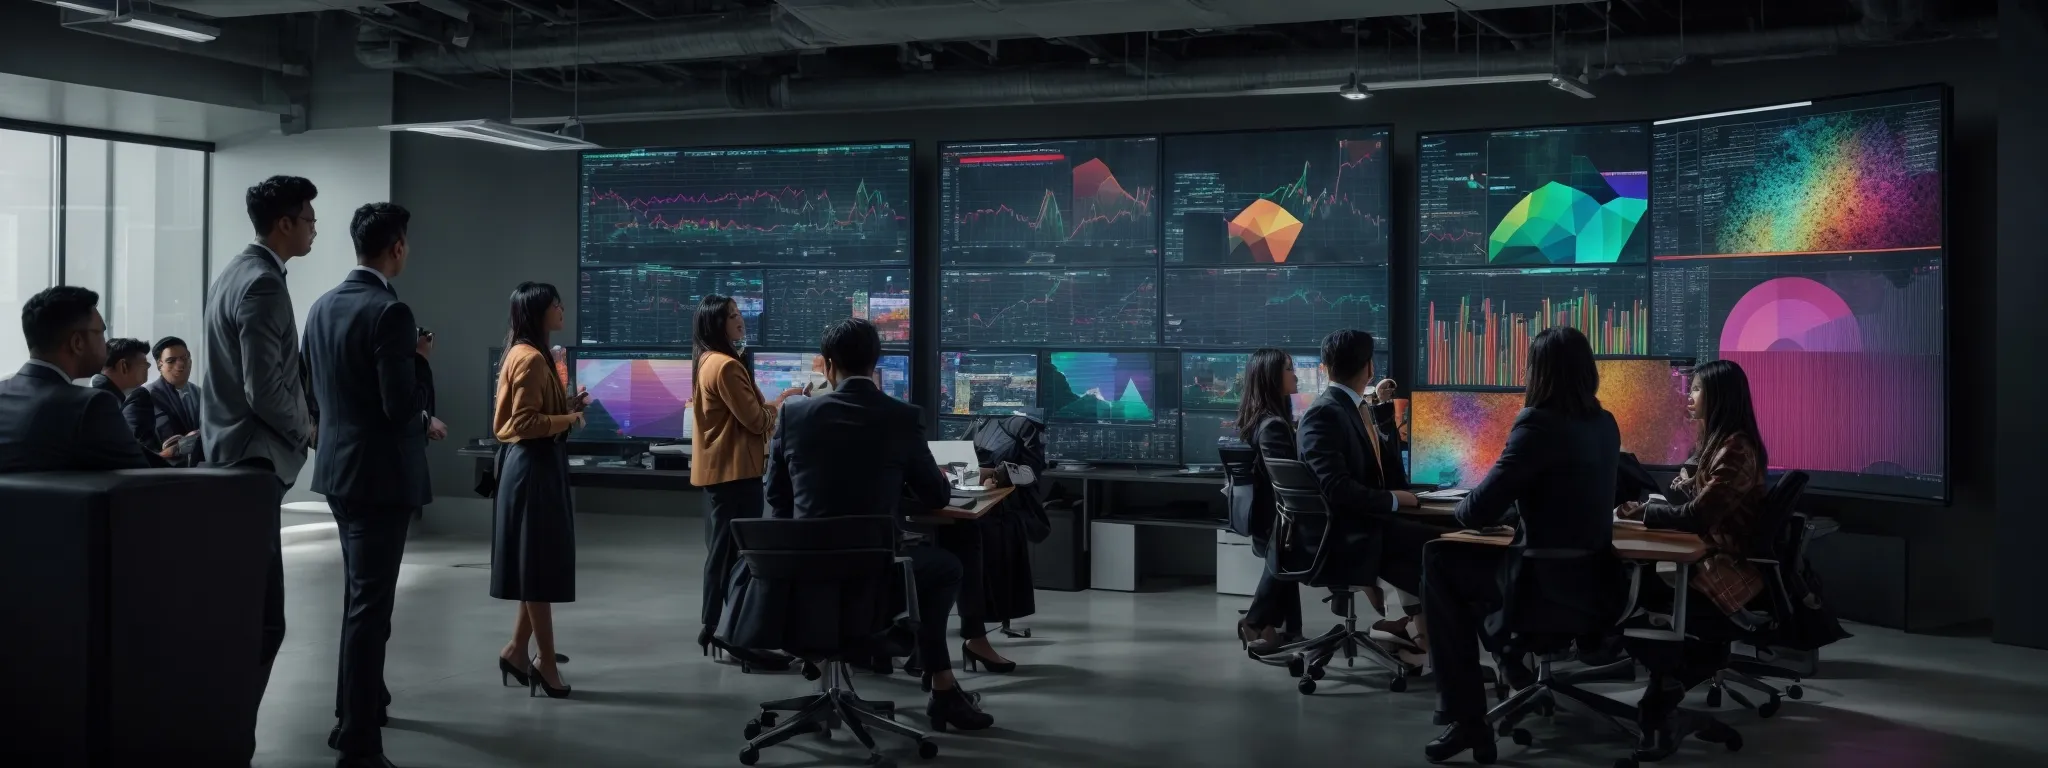 a group of professionals gathered around a large screen displaying colorful data visualizations in a high-tech office environment.